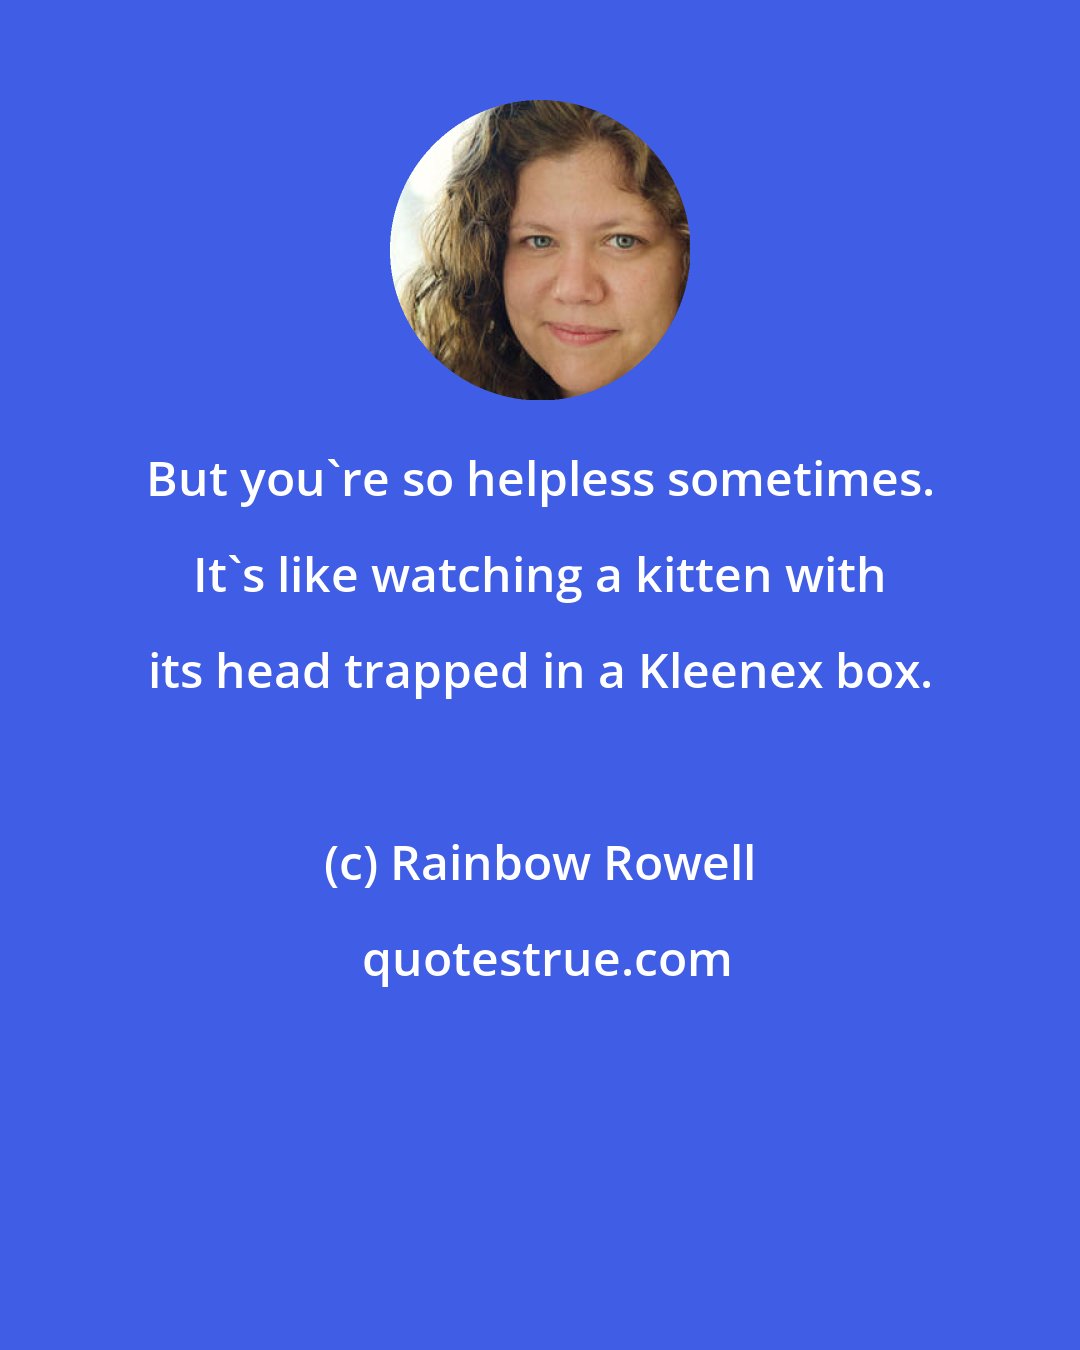 Rainbow Rowell: But you're so helpless sometimes. It's like watching a kitten with its head trapped in a Kleenex box.